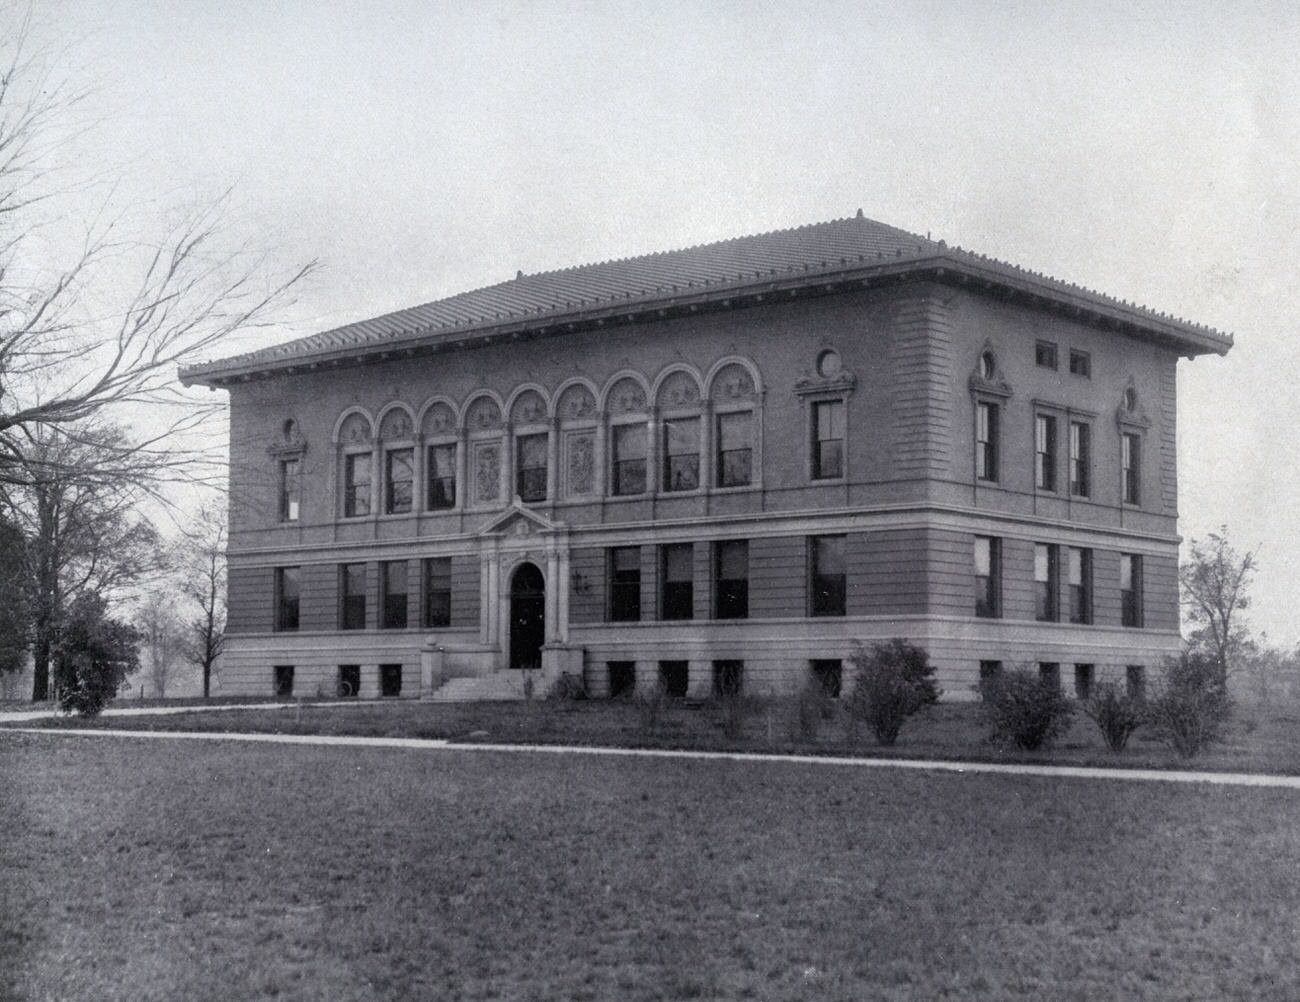 Biological Hall at The Ohio State University, designed by Yost & Packard, built in 1898, demolished in 1924, circa 1900.